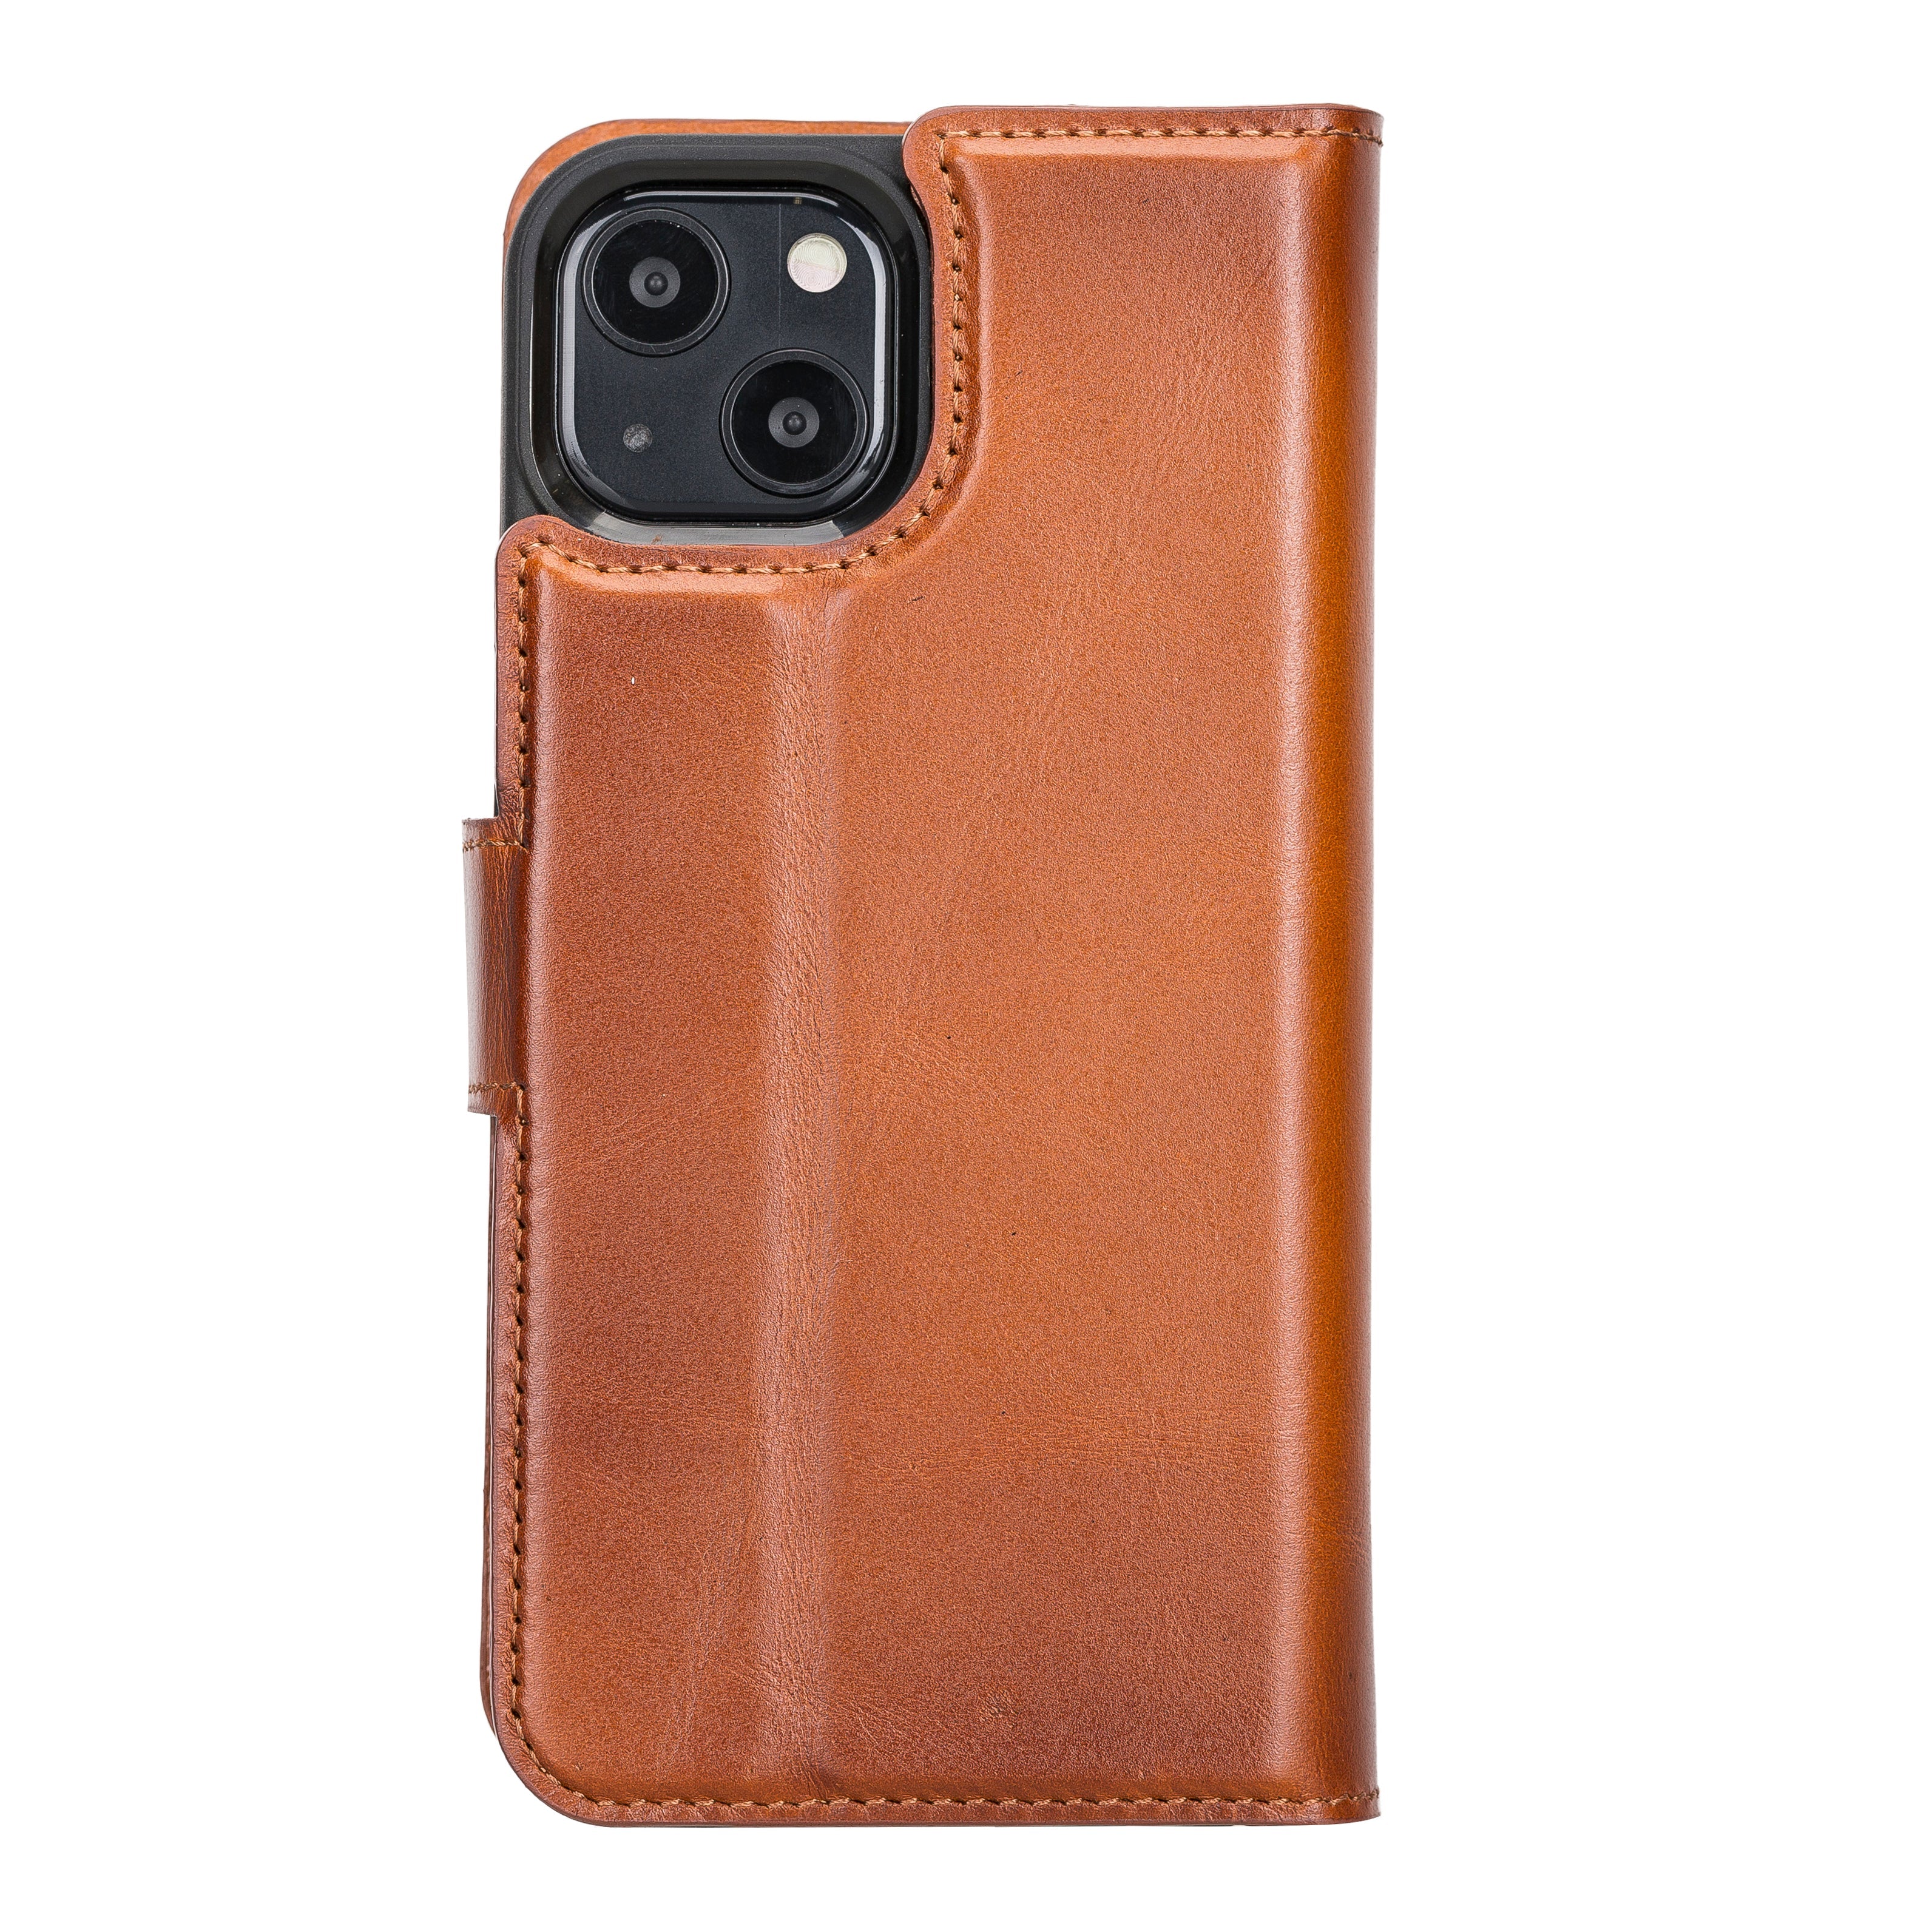 Burnished Tan Leather Magnetic Wallet Case for iPhone 13 Mini (5.4")